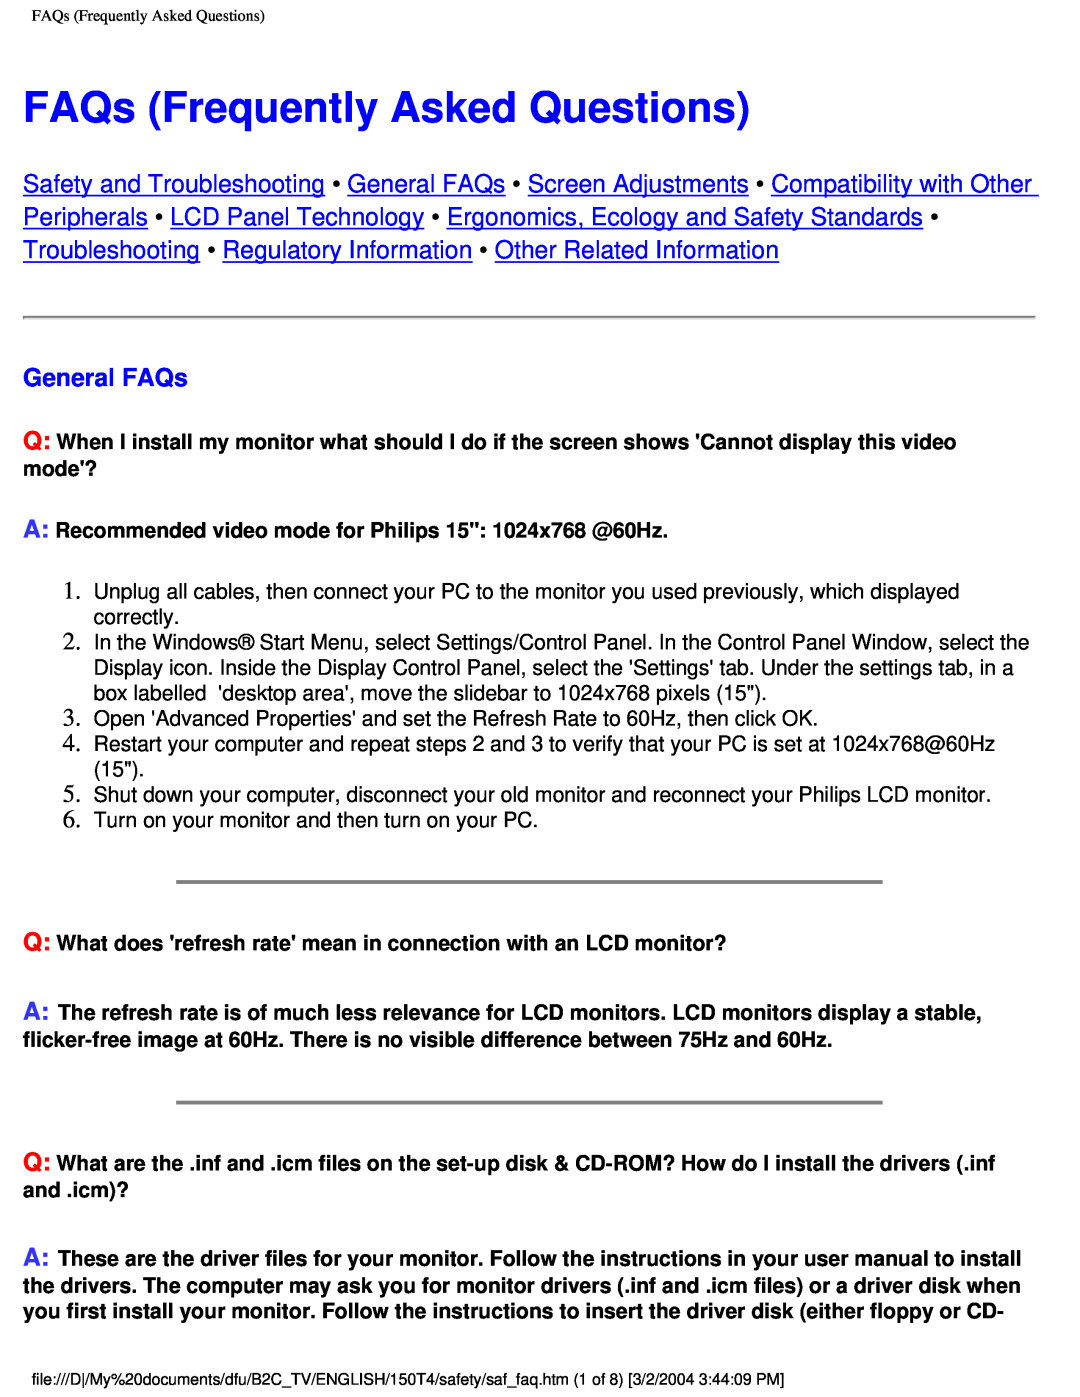 Philips 150T4 manual FAQs Frequently Asked Questions, General FAQs 